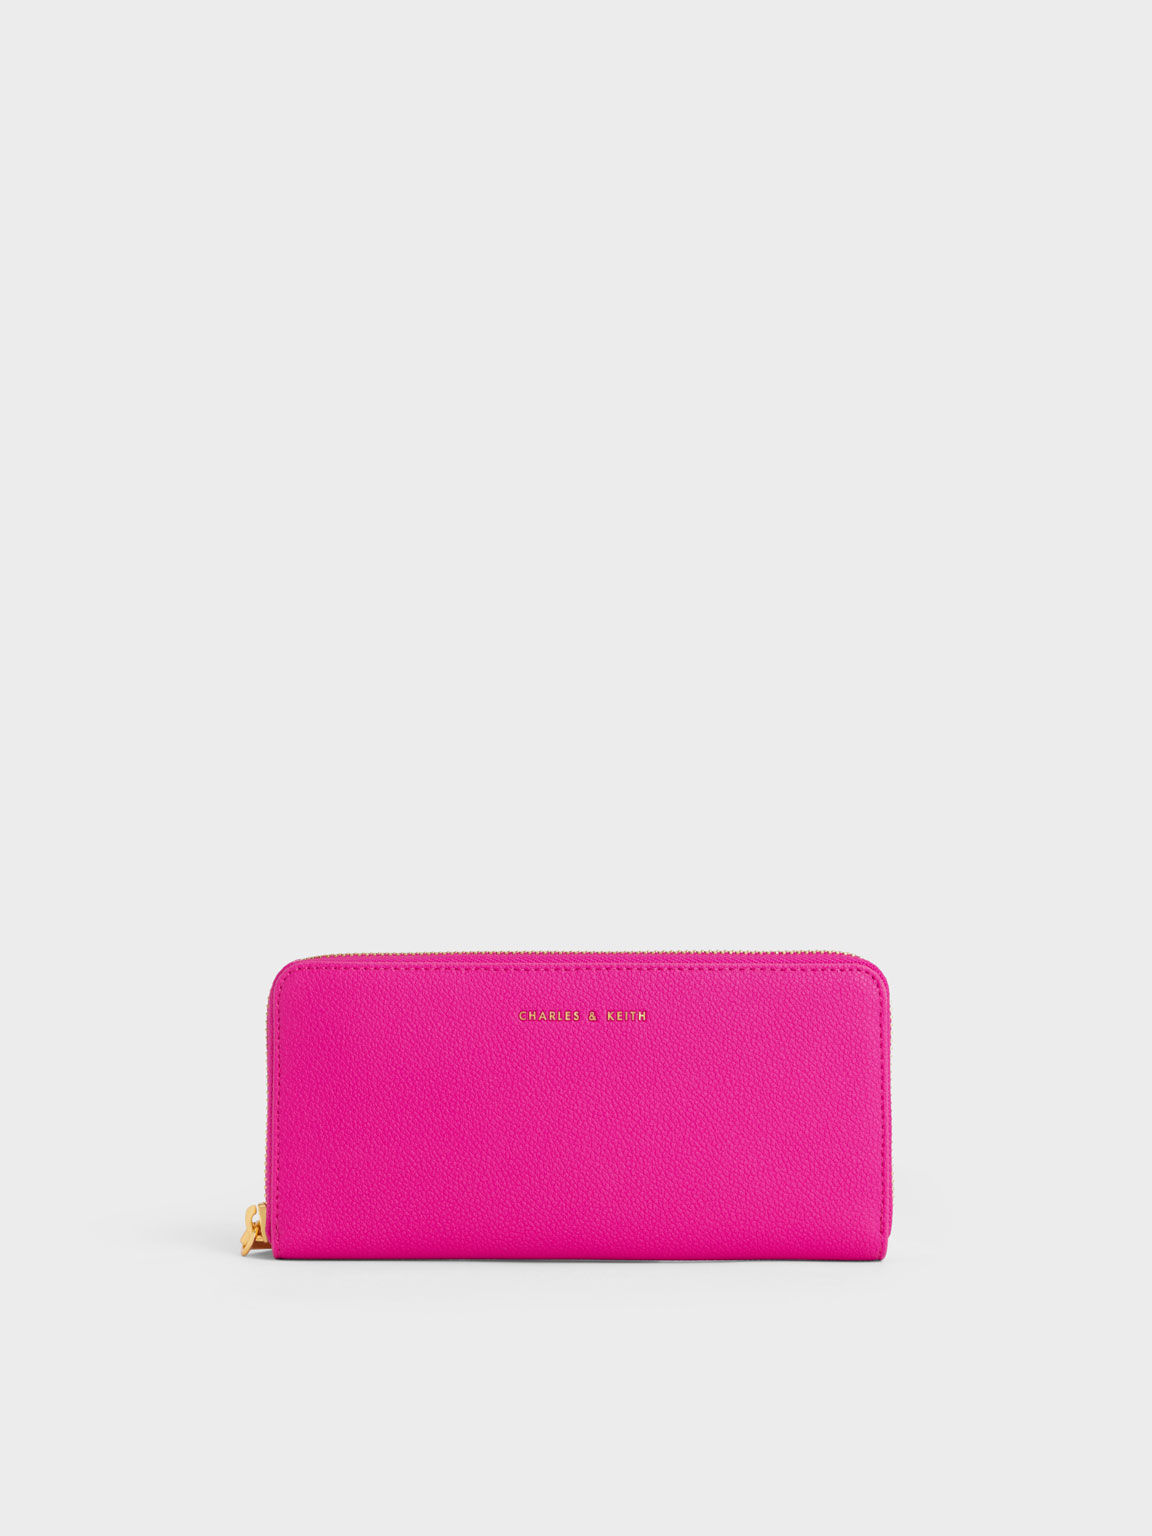 zip wallet in natural with neon pink stripe – Twigs